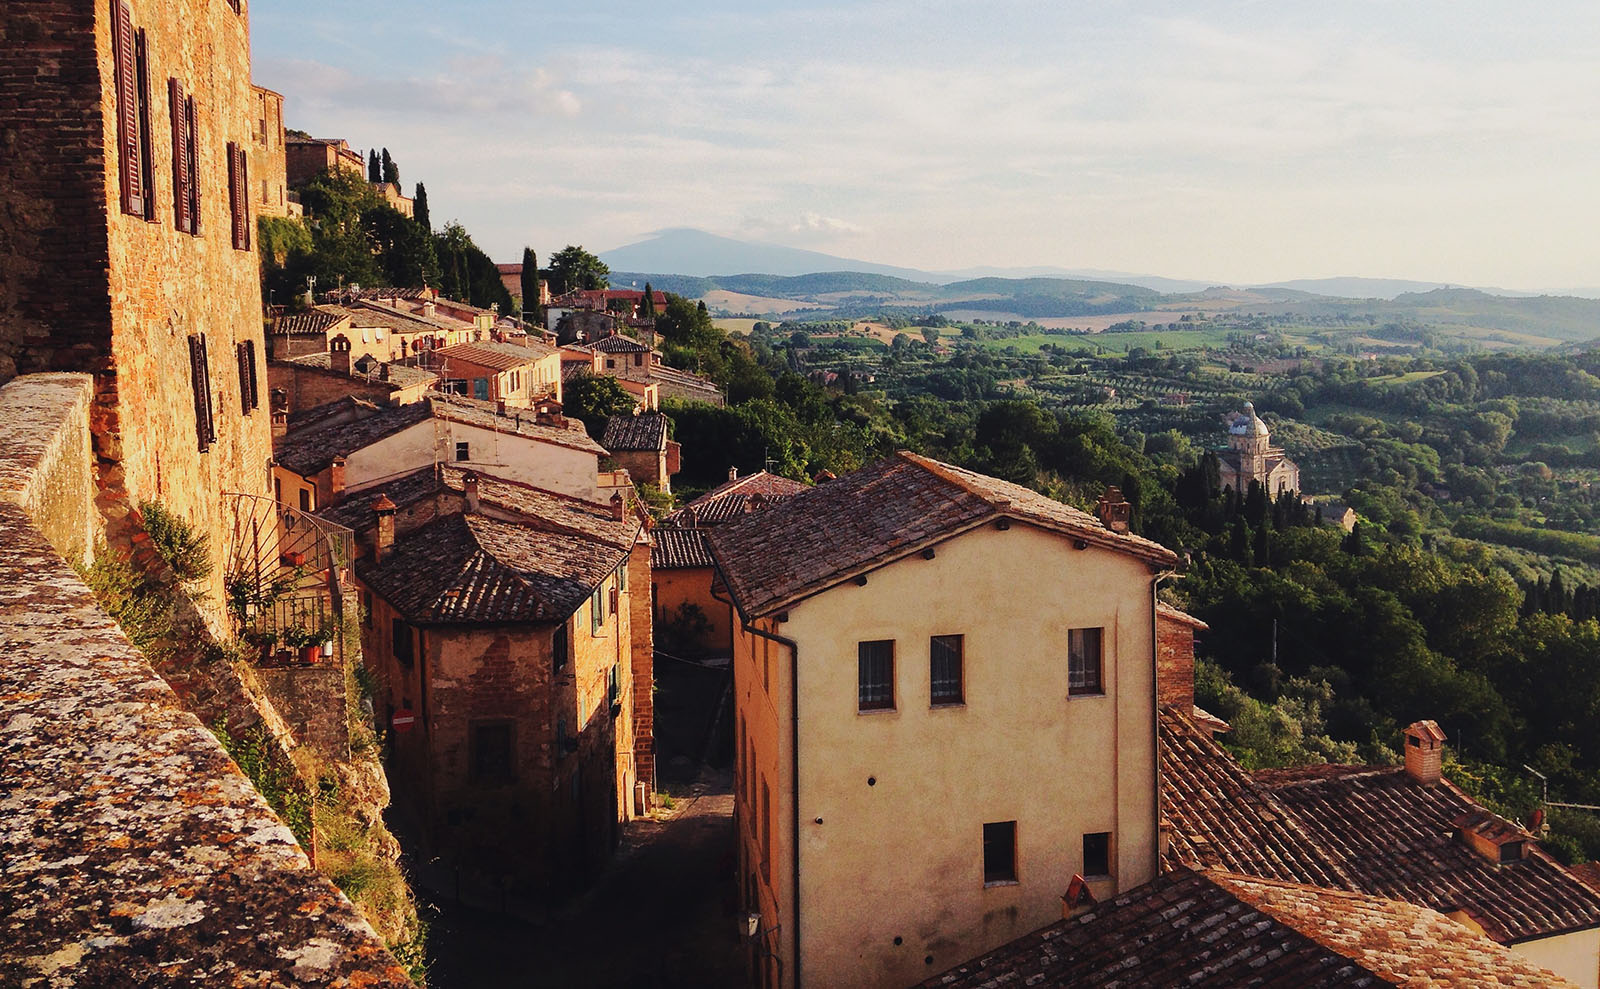 houses on the hillside in Montepulciano, Italy